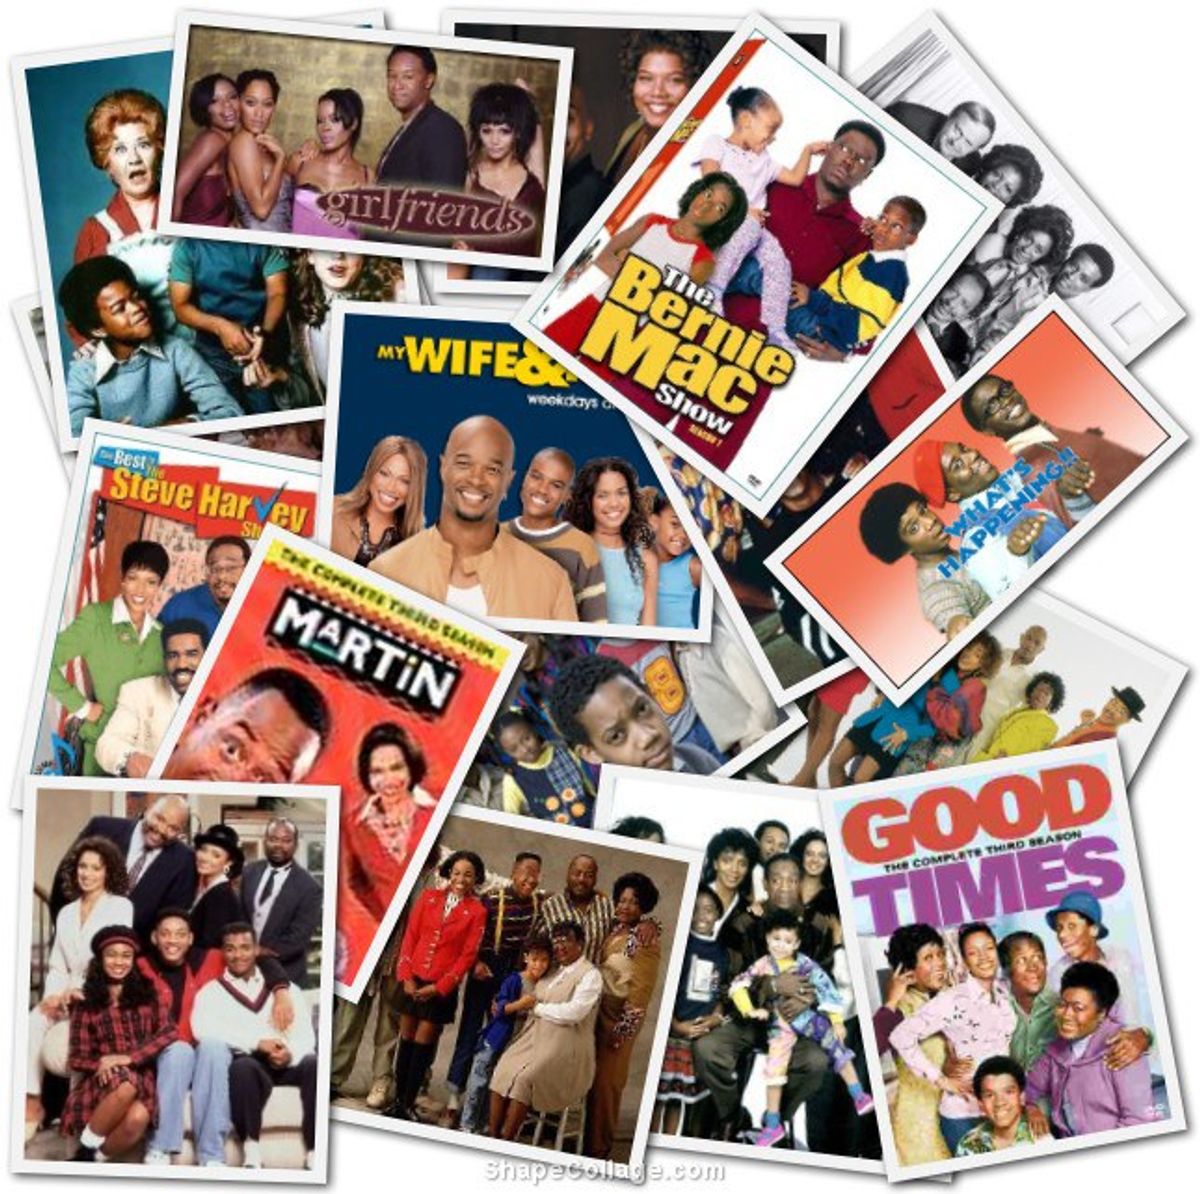 5 Black Sitcoms from the 90s-2000s needed on DVD